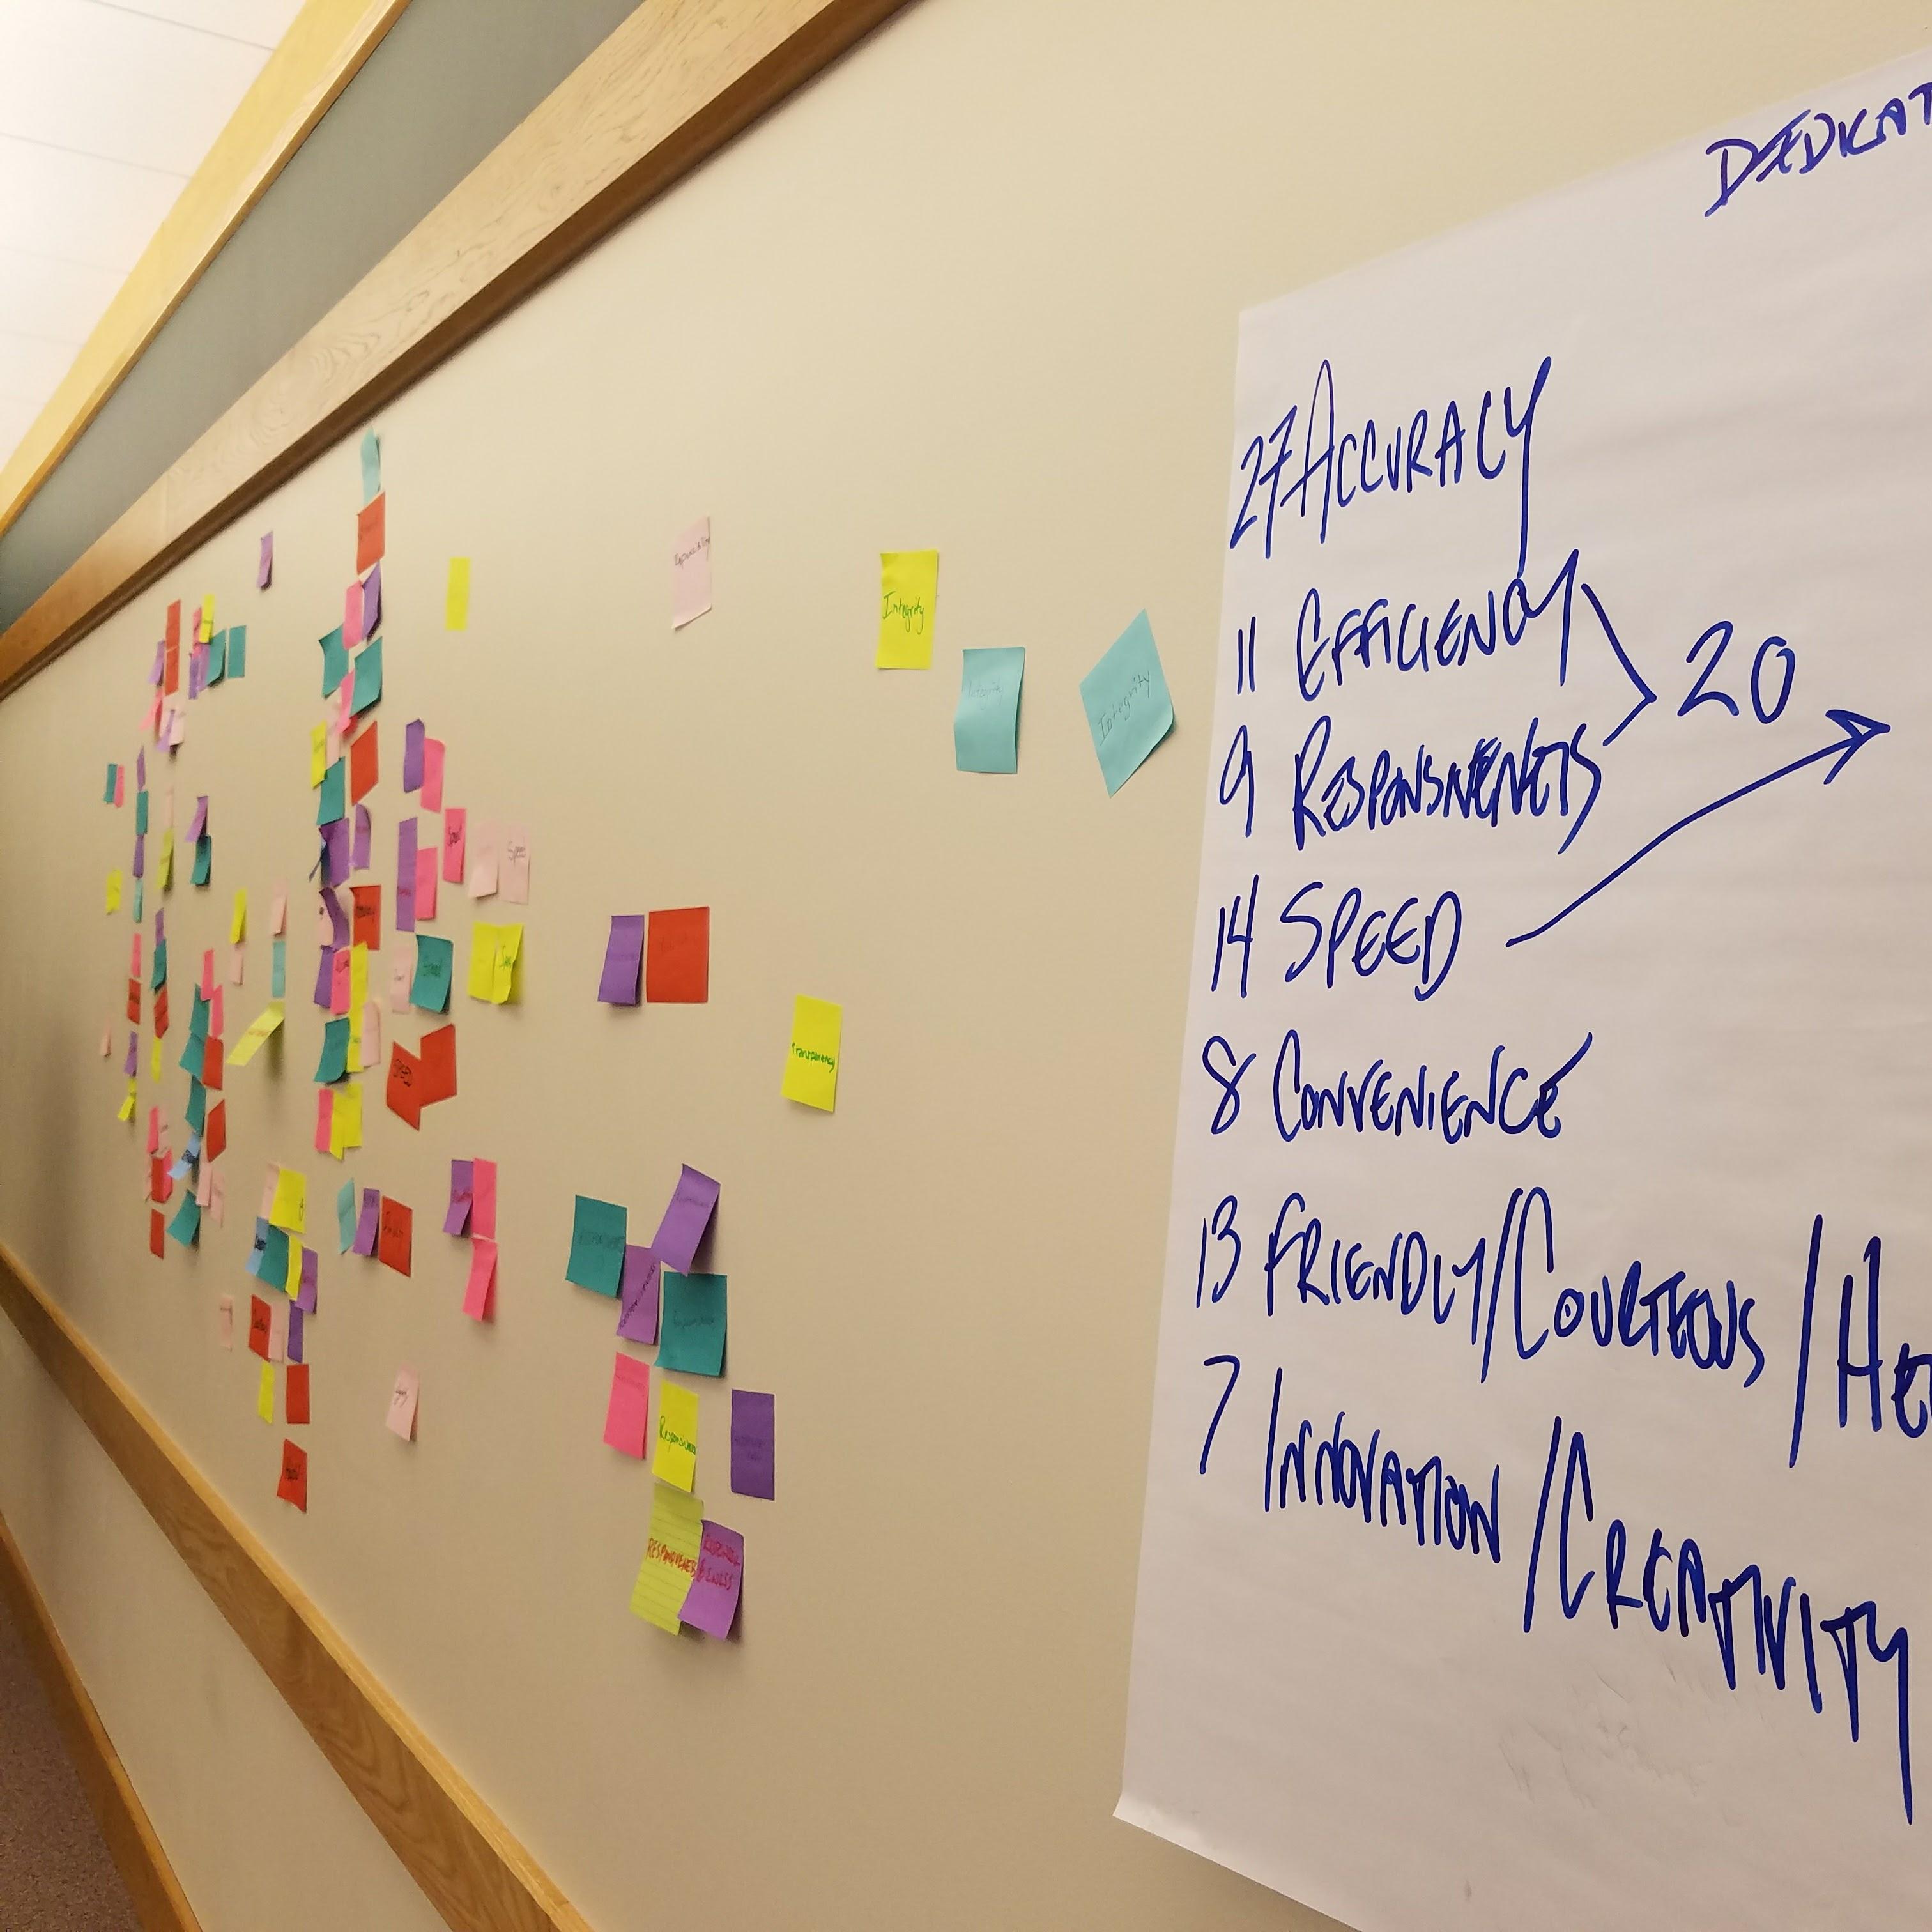 A photograph of a whiteboard with many post it notes and notes from a meeting displayed.